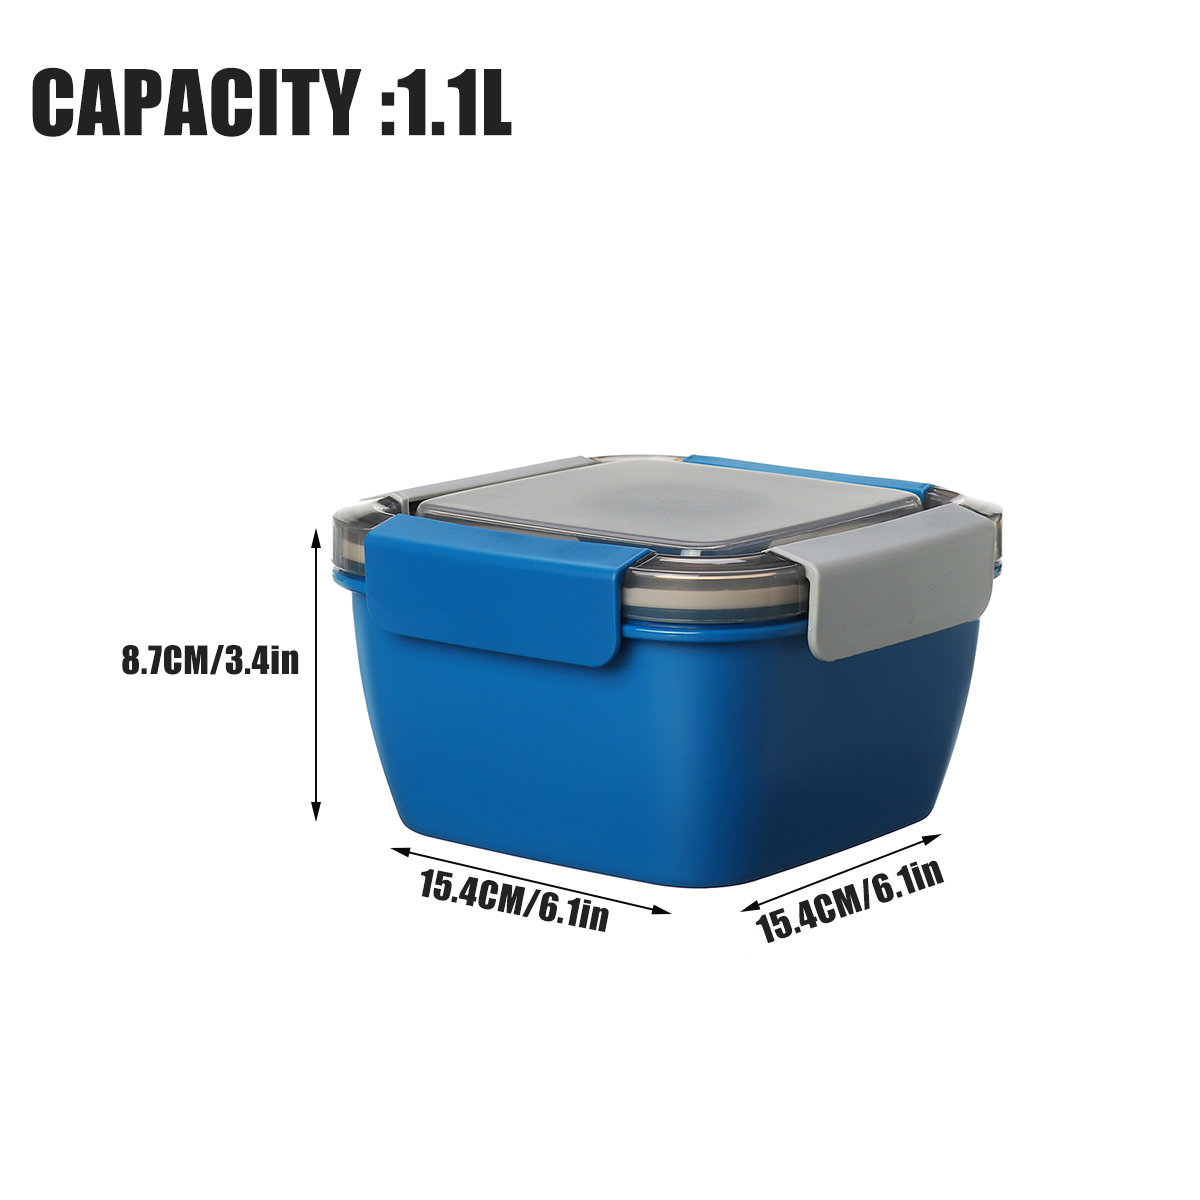 Portable-Sealed-Divider-Bento-Lunch-Box-Container-Leak-Proof-Food-Stroage-Case-Camping-BBQ-Tableware-1565575-5